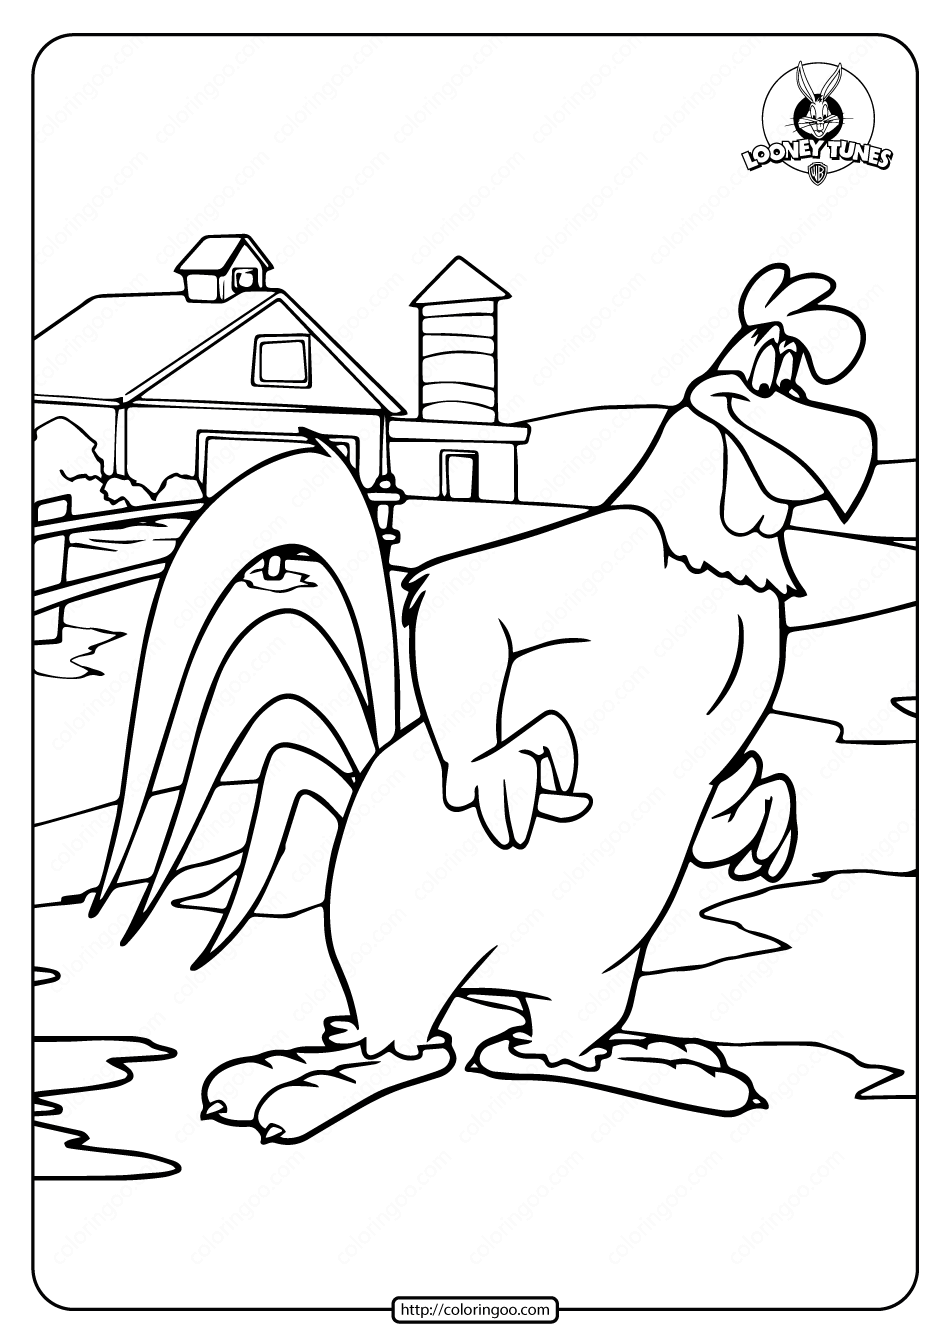 Printable Foghorn Leghorn Coloring Pages